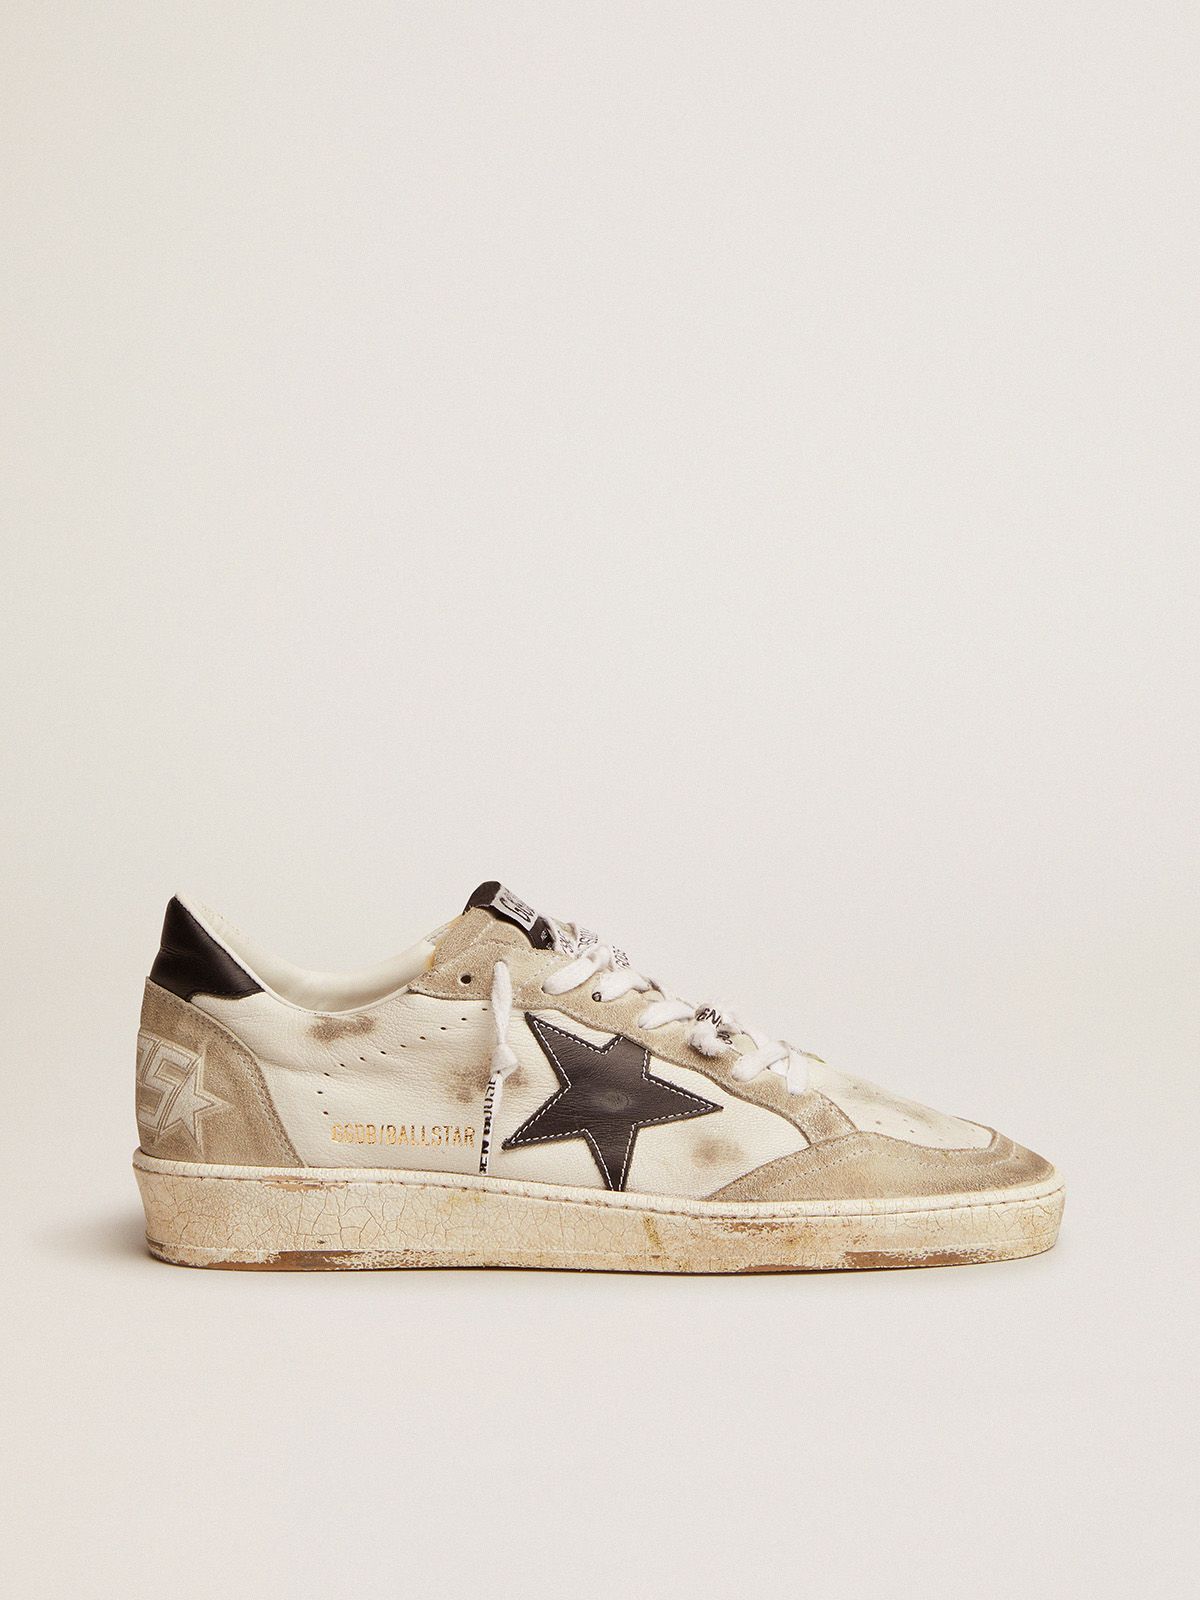 Ball Star sneakers in white leather and ice-gray suede with black leather detail | 